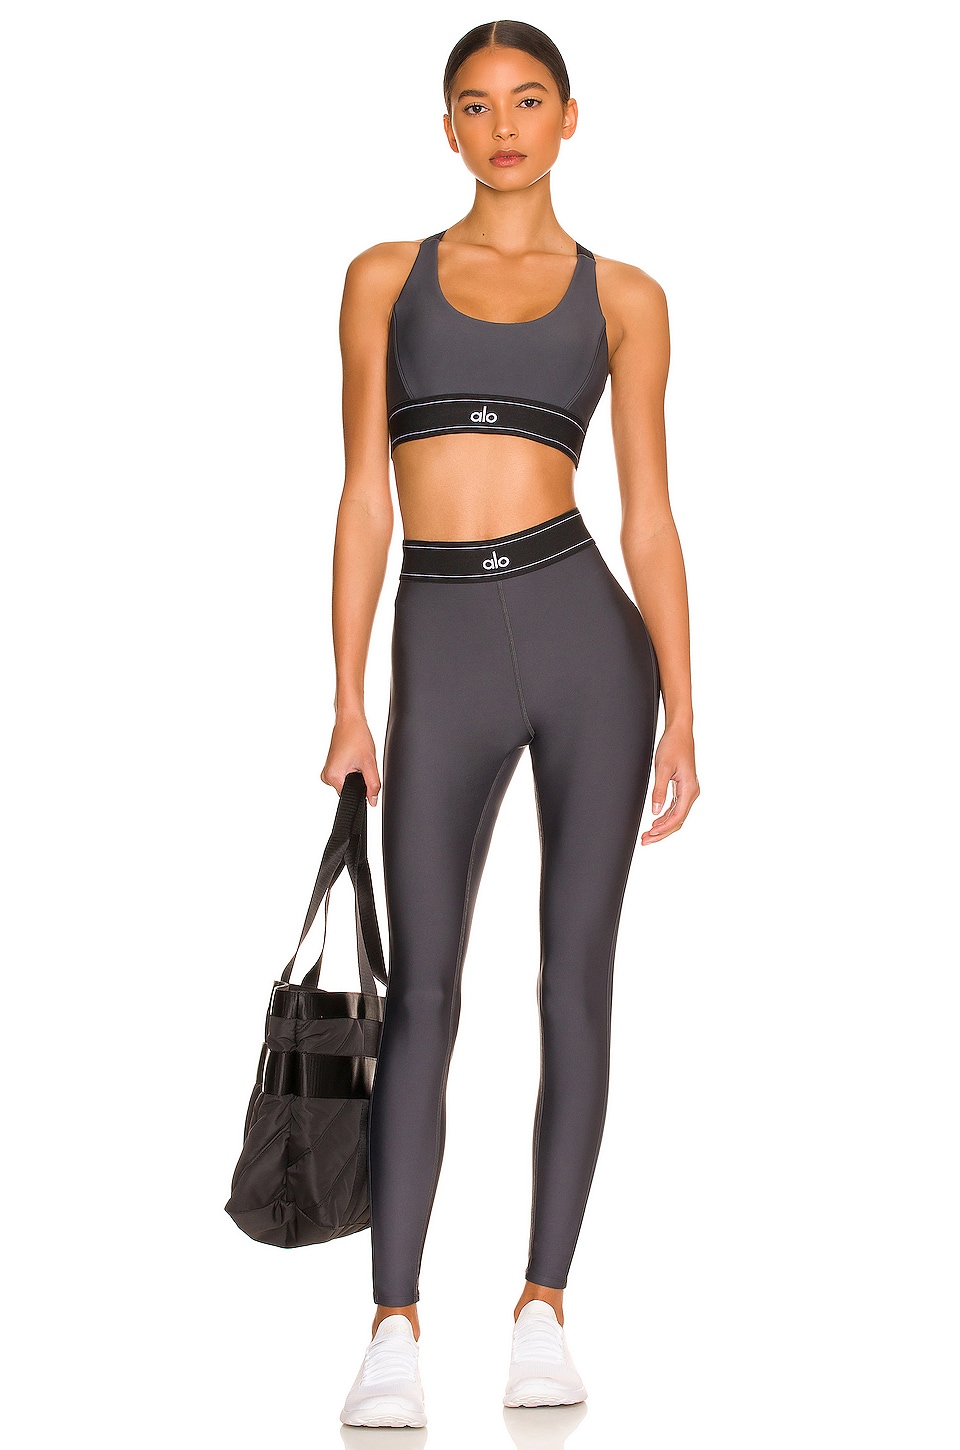 alo Airlift High Waist Suit Up Legging in Anthracite & Black | REVOLVE